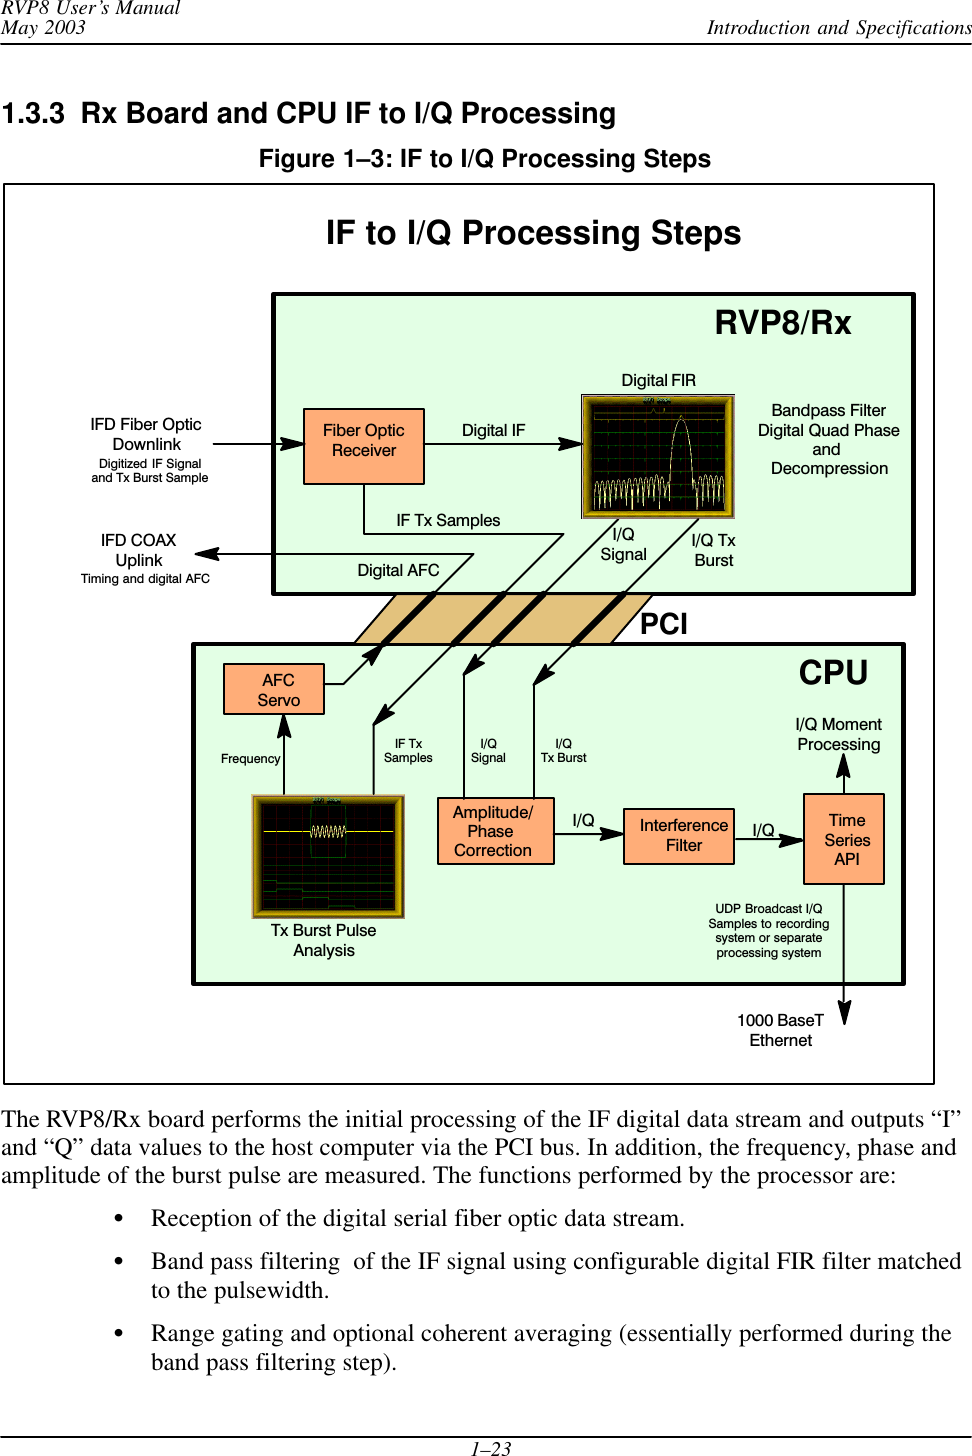 Introduction and SpecificationsRVP8 User’s ManualMay 20031–231.3.3  Rx Board and CPU IF to I/Q ProcessingFigure 1–3: IF to I/Q Processing Steps Fiber OpticReceiverDigital IFIF Tx SamplesBandpass FilterDigital Quad Phaseand DecompressionTx Burst PulseAnalysisFrequencyAmplitude/Phase CorrectionInterferenceFilterAFCServoI/QSignal I/Q TxBurstIFD Fiber OpticDownlinkIFD COAXUplinkDigitized IF Signaland Tx Burst SampleTiming and digital AFCIF to I/Q Processing Steps1000 BaseTEthernetUDP Broadcast I/QSamples to recordingsystem or separateprocessing systemDigital FIRRVP8/RxCPUPCII/QDigital AFCI/Q MomentProcessingIF TxSamplesI/QTx BurstI/QSignalI/Q TimeSeriesAPIThe RVP8/Rx board performs the initial processing of the IF digital data stream and outputs “I”and “Q” data values to the host computer via the PCI bus. In addition, the frequency, phase andamplitude of the burst pulse are measured. The functions performed by the processor are:Reception of the digital serial fiber optic data stream.Band pass filtering  of the IF signal using configurable digital FIR filter matchedto the pulsewidth.Range gating and optional coherent averaging (essentially performed during theband pass filtering step).